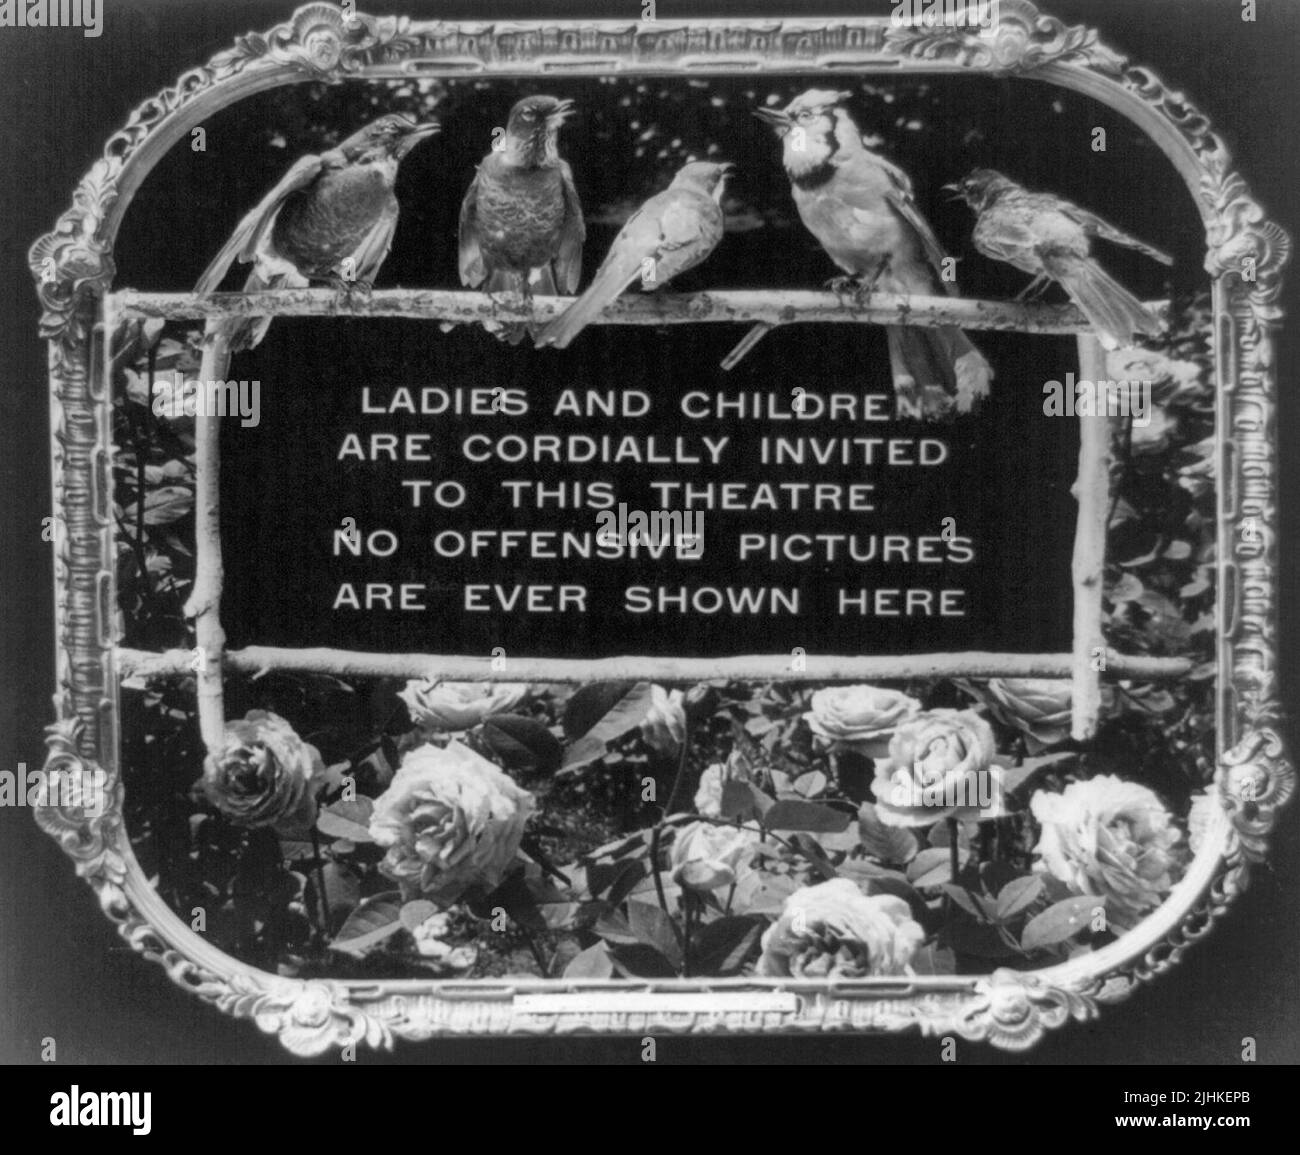 Ladies and children are cordially invited to this theatre. No offensive pictures are ever shown here. Photo shows song birds and roses. Positive paper print from lantern slide used in motion picture theaters as announcement. Circa 1912 Stock Photo